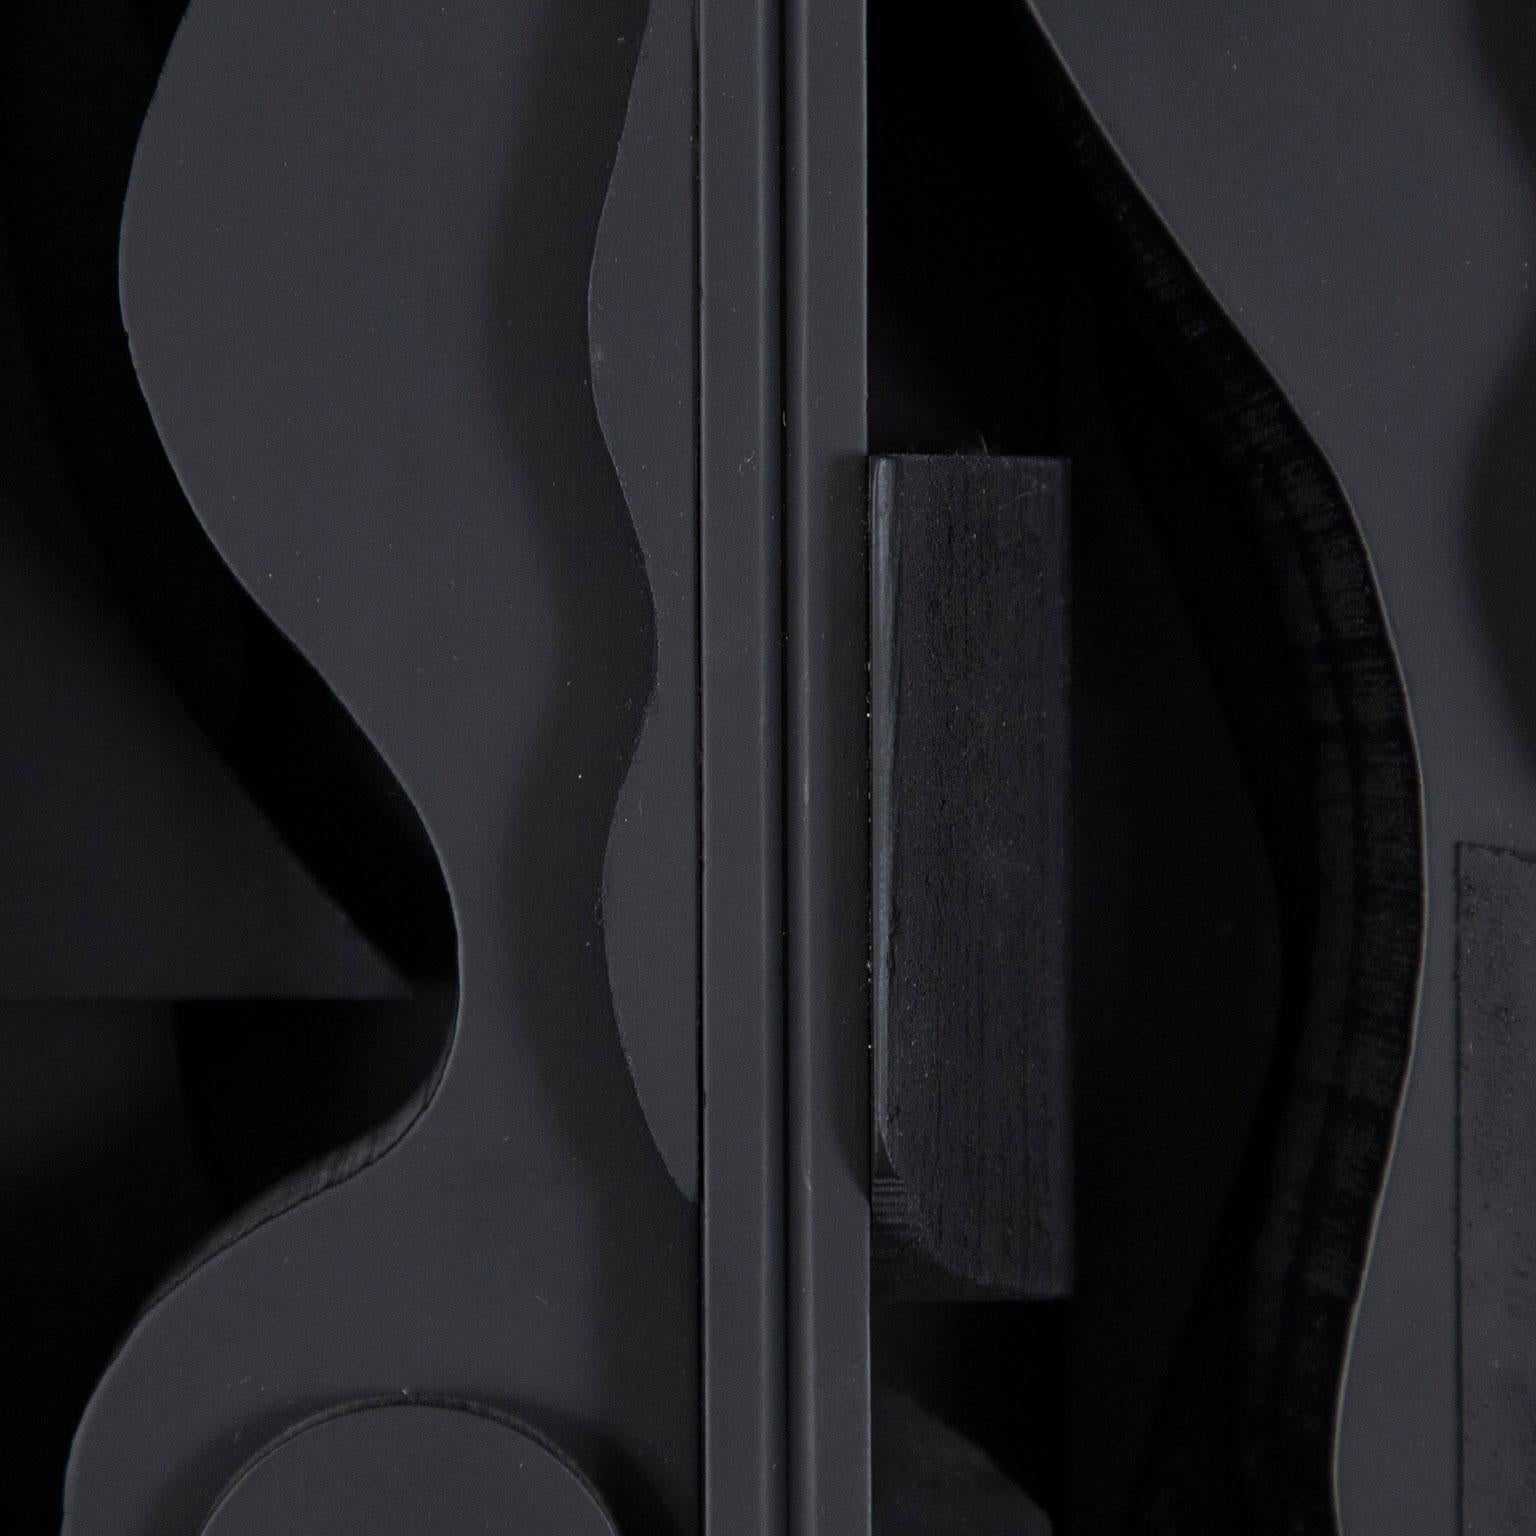 Night Blossom - Sculpture by Louise Nevelson